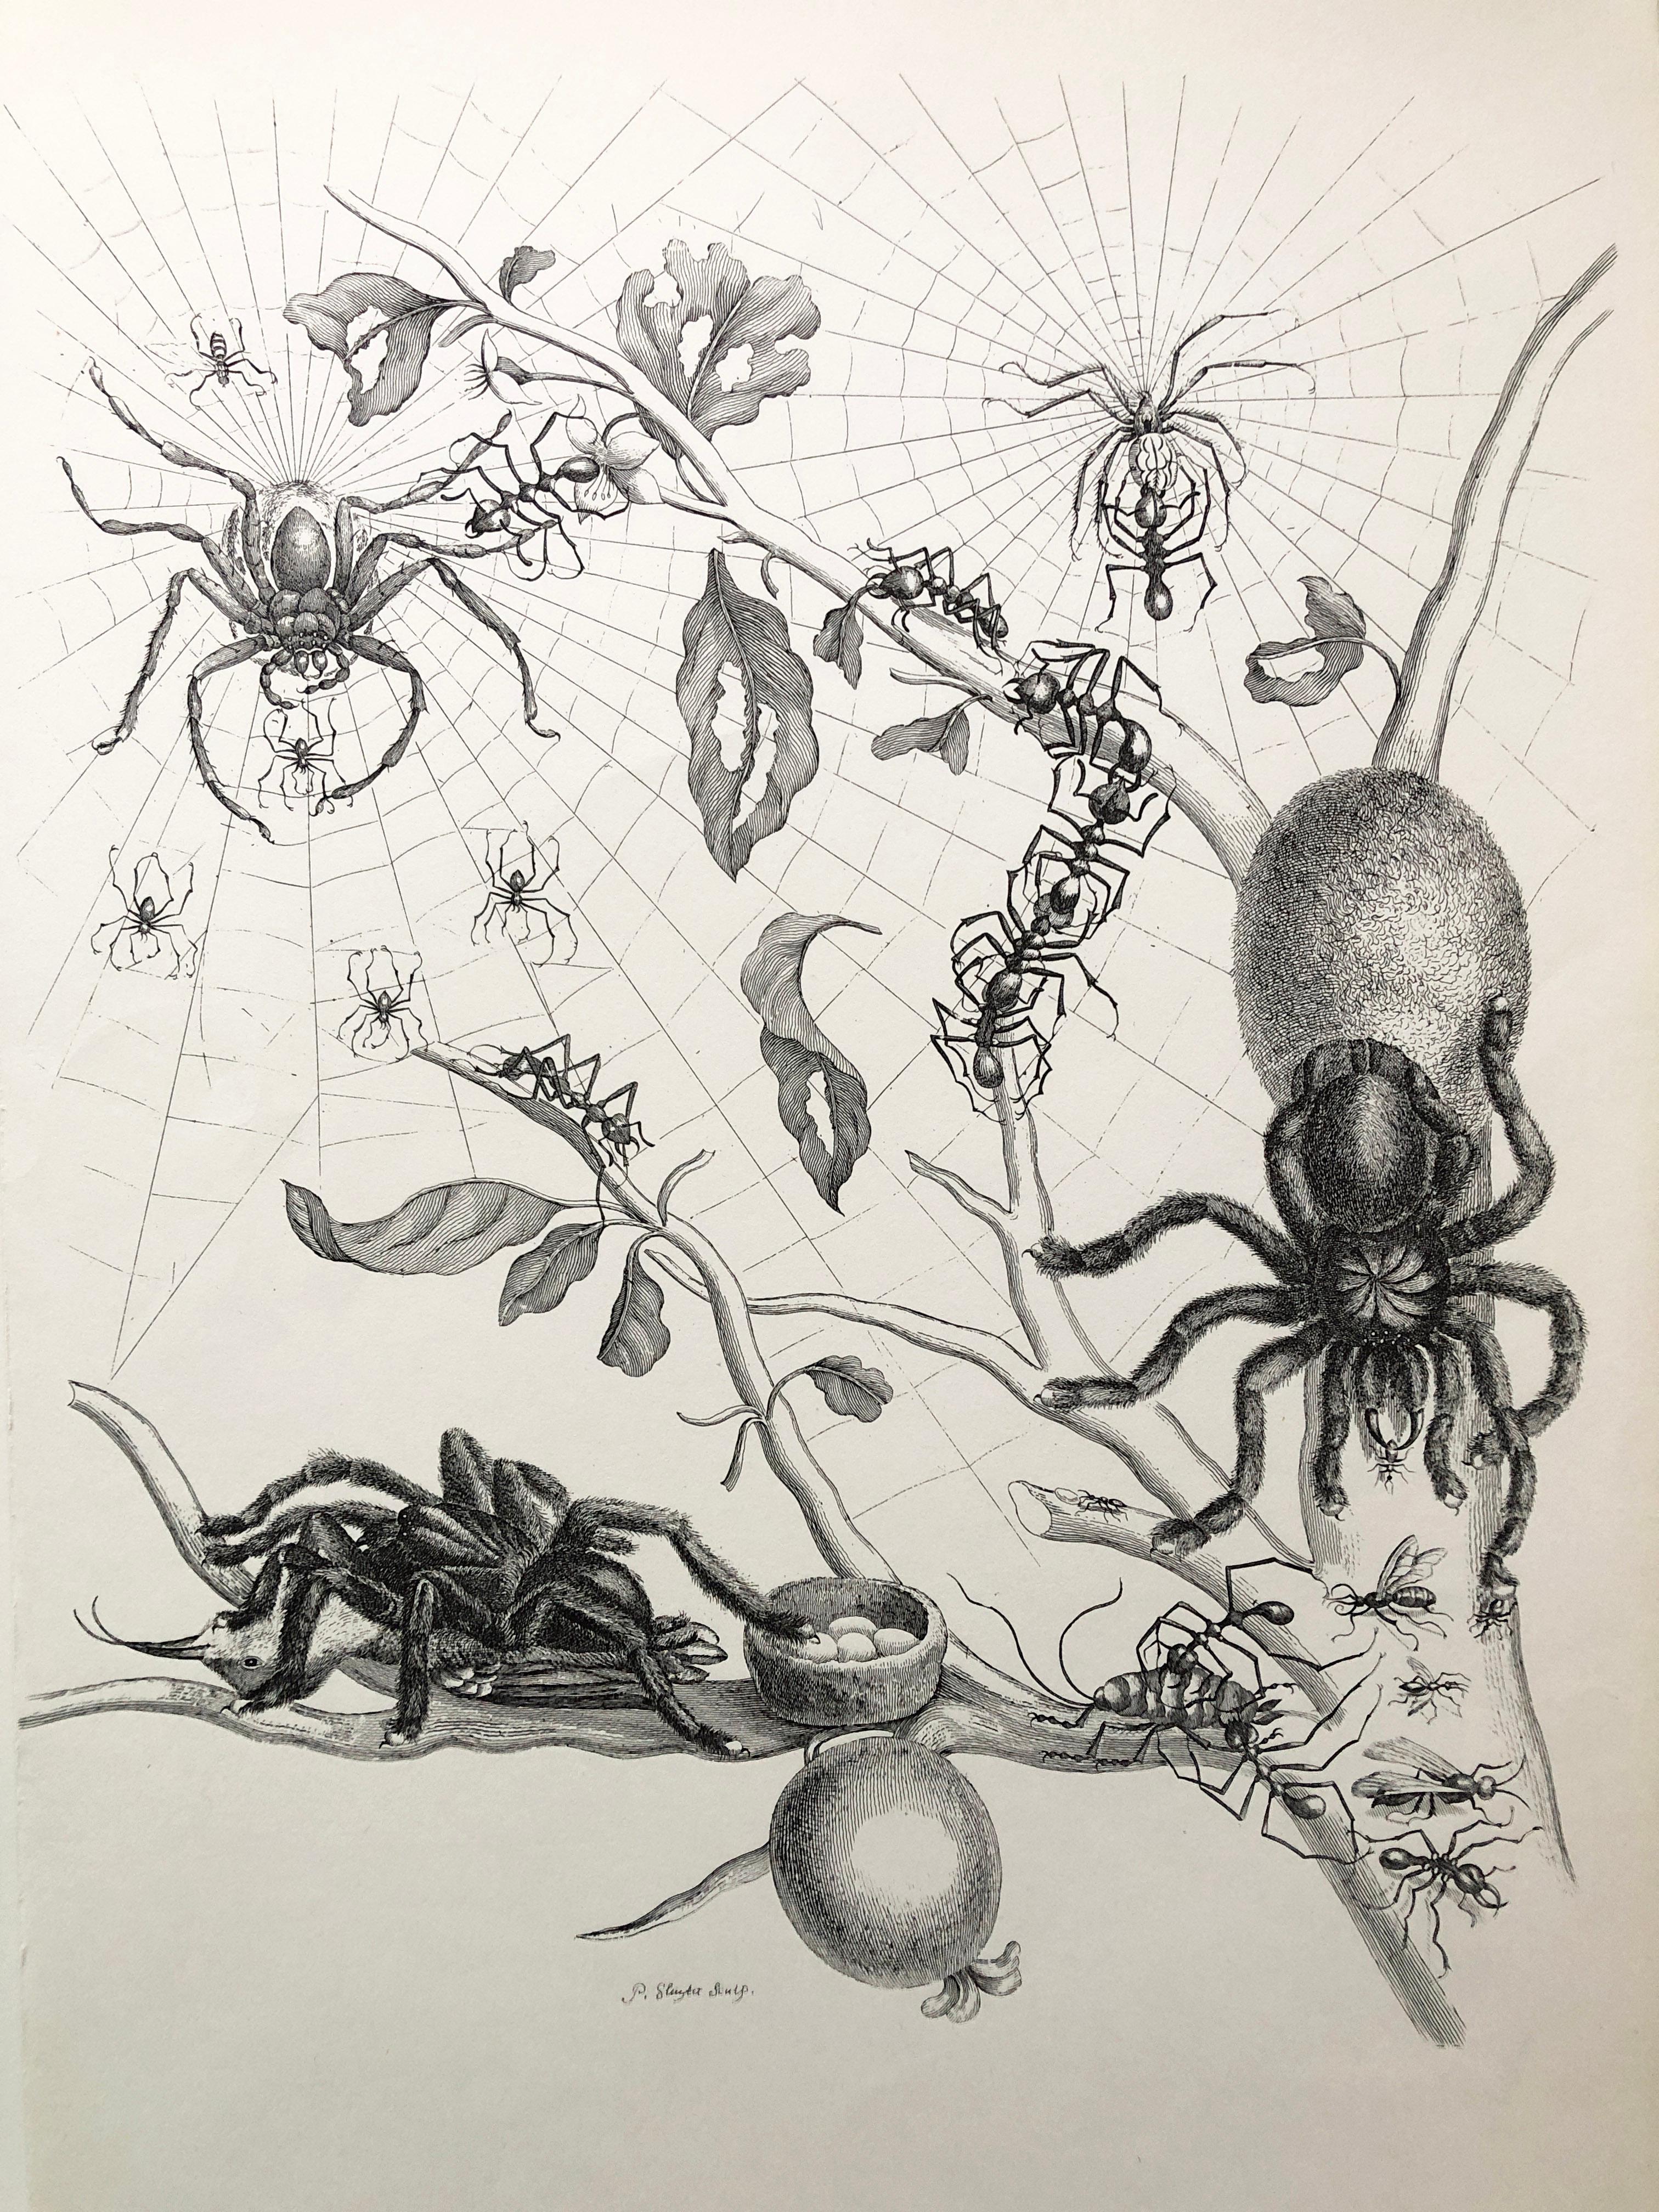 Dutch Maria Sibylla Merian - P. Sluyter Sculp - Guayave spiders and insects Nr. 18 For Sale